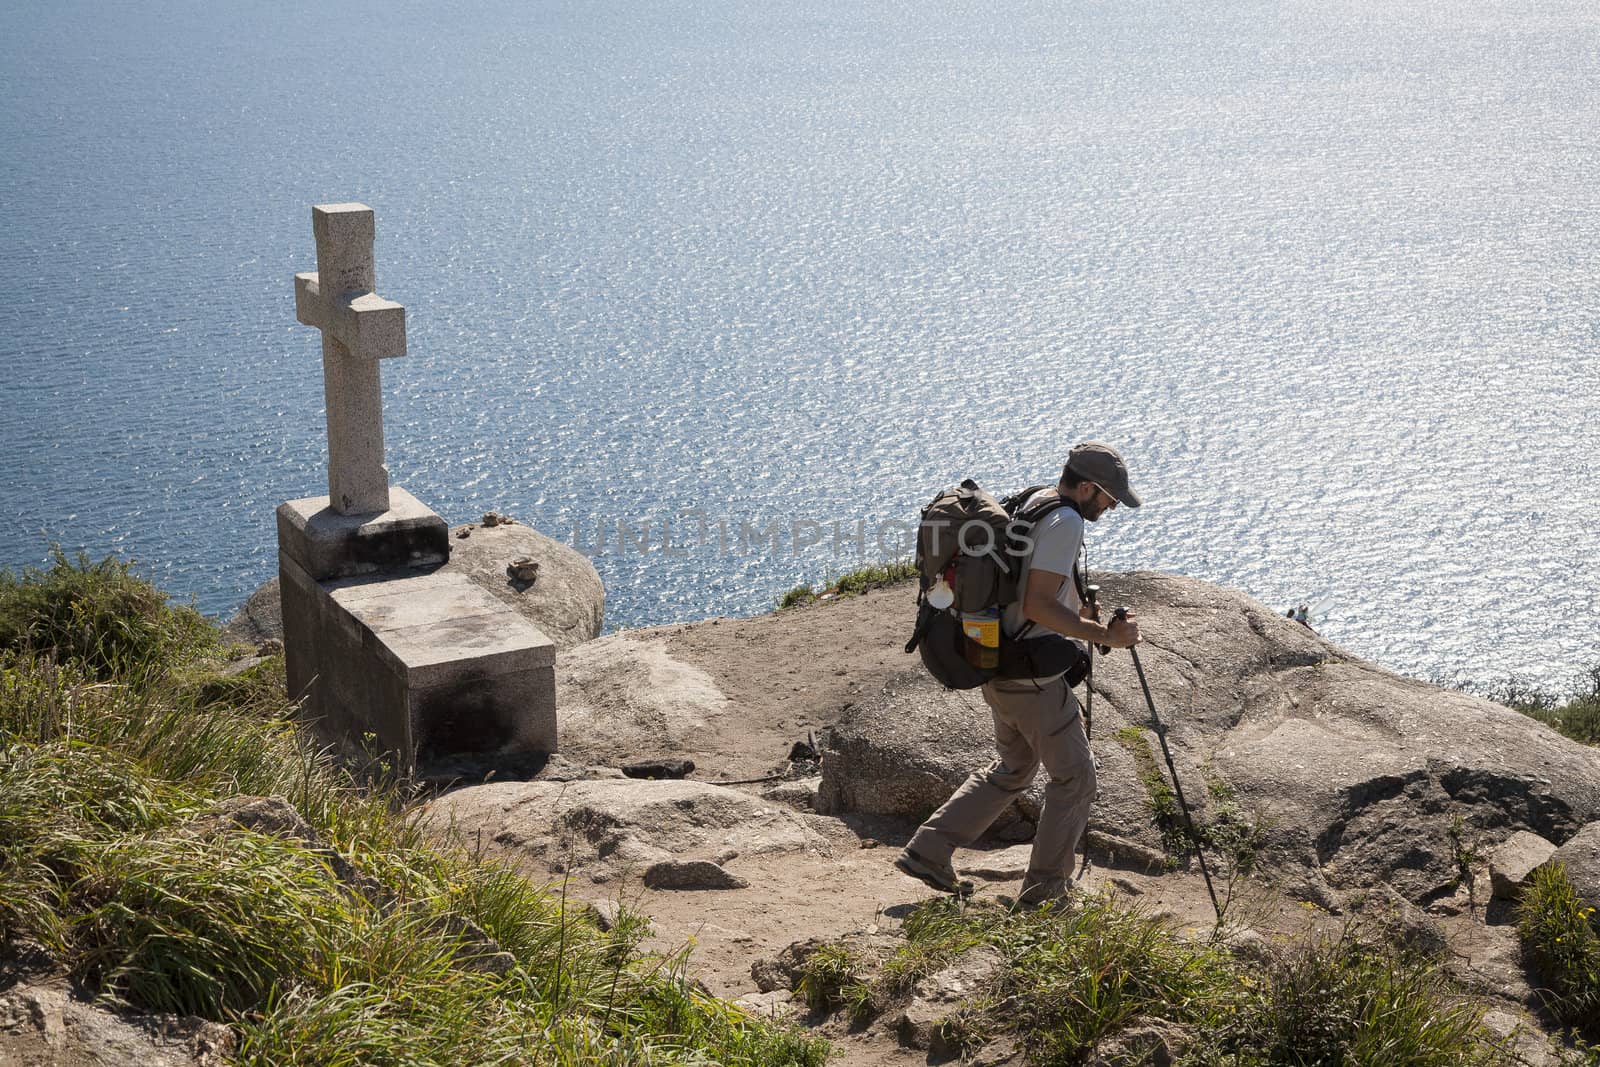 FINISTERE, SPAIN – SEPTEMBER 4:  Unidentified pilgrim at the end of his Camino de Santiago walk on September 4, 2012. Here he will burn his clothes and boots and throw the ashes into the sea.